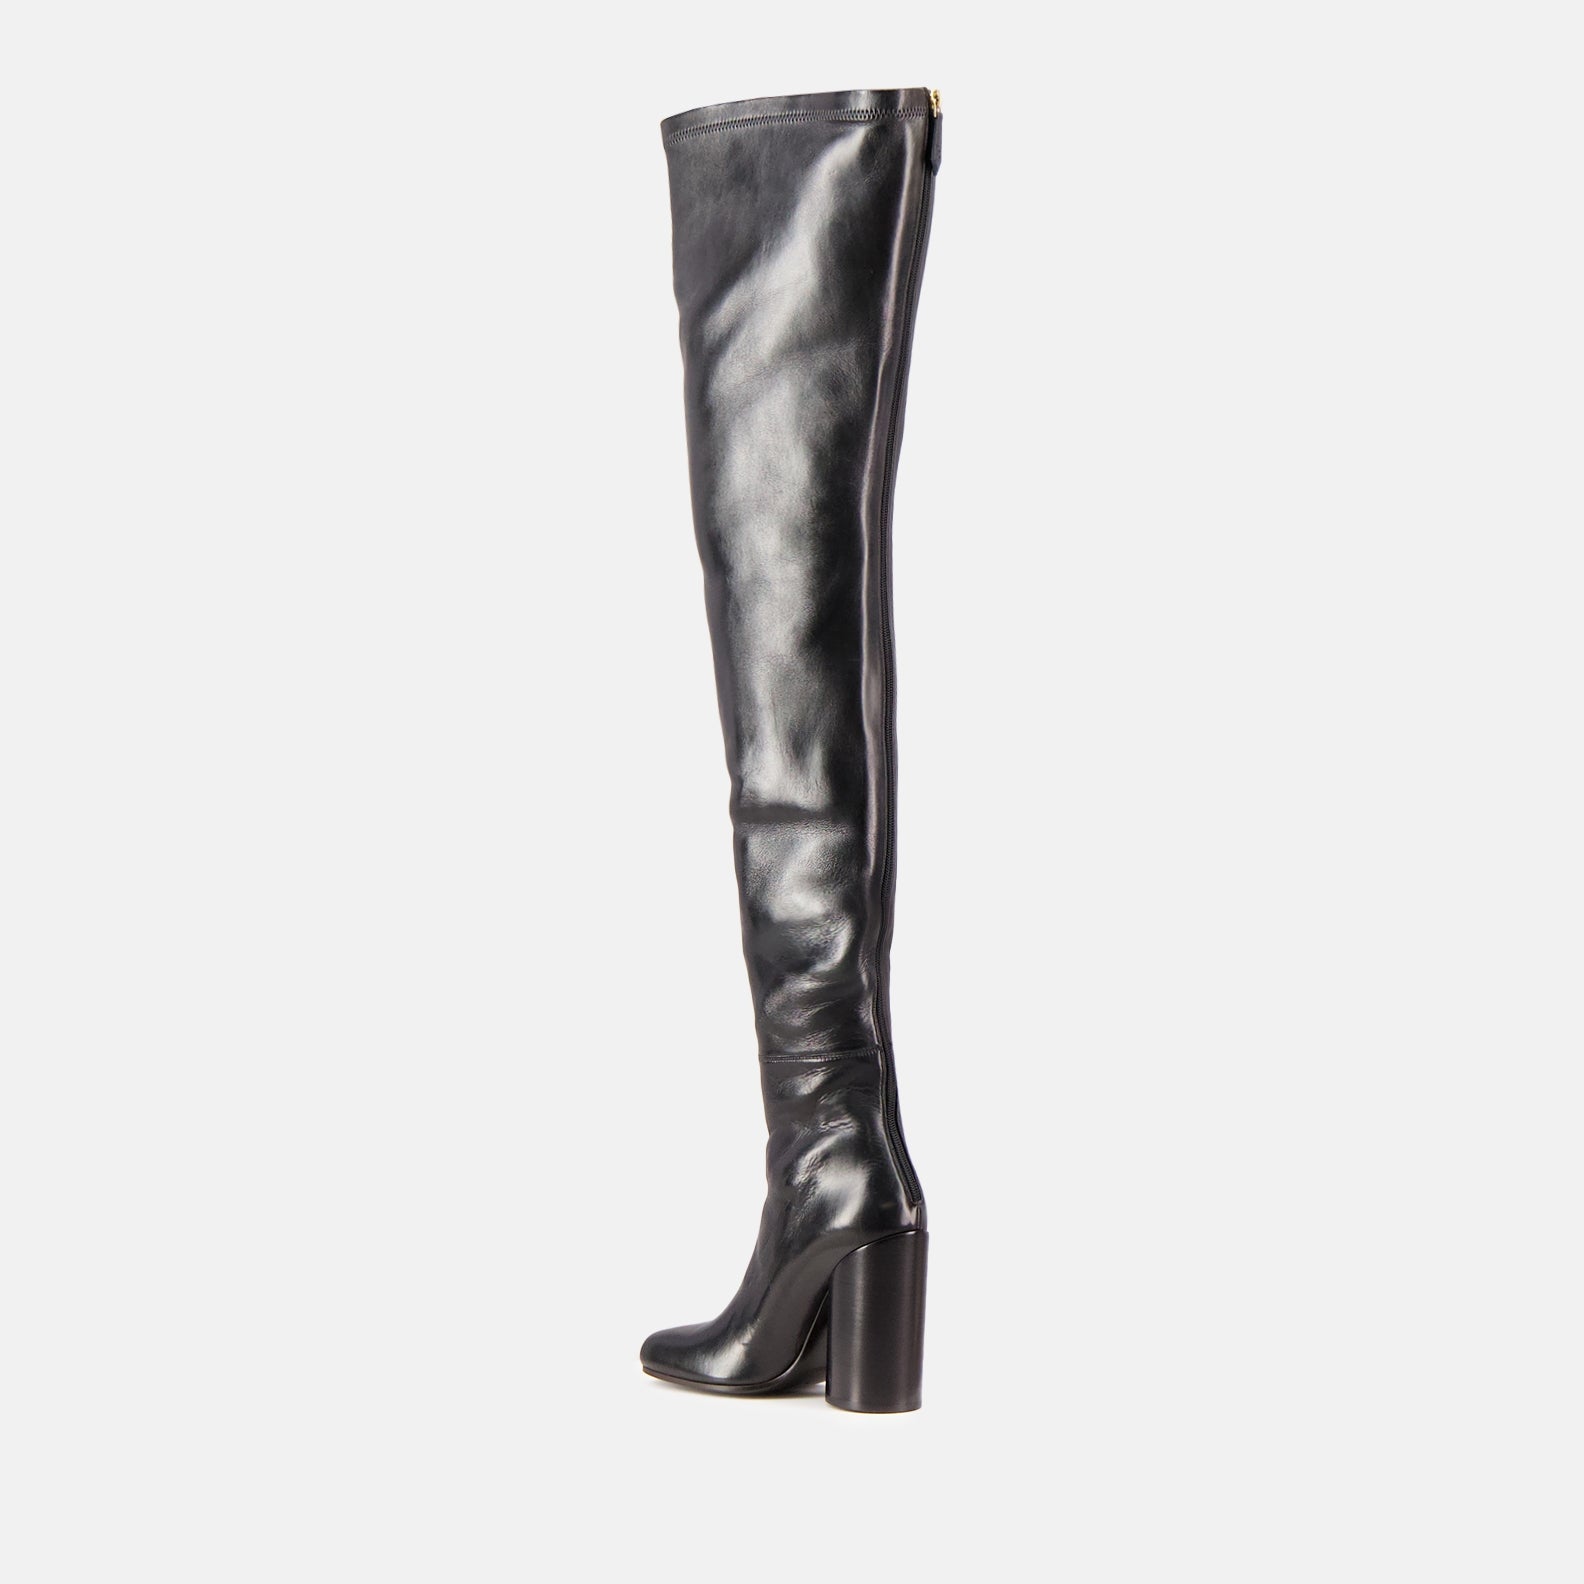 Leather thigh high boots